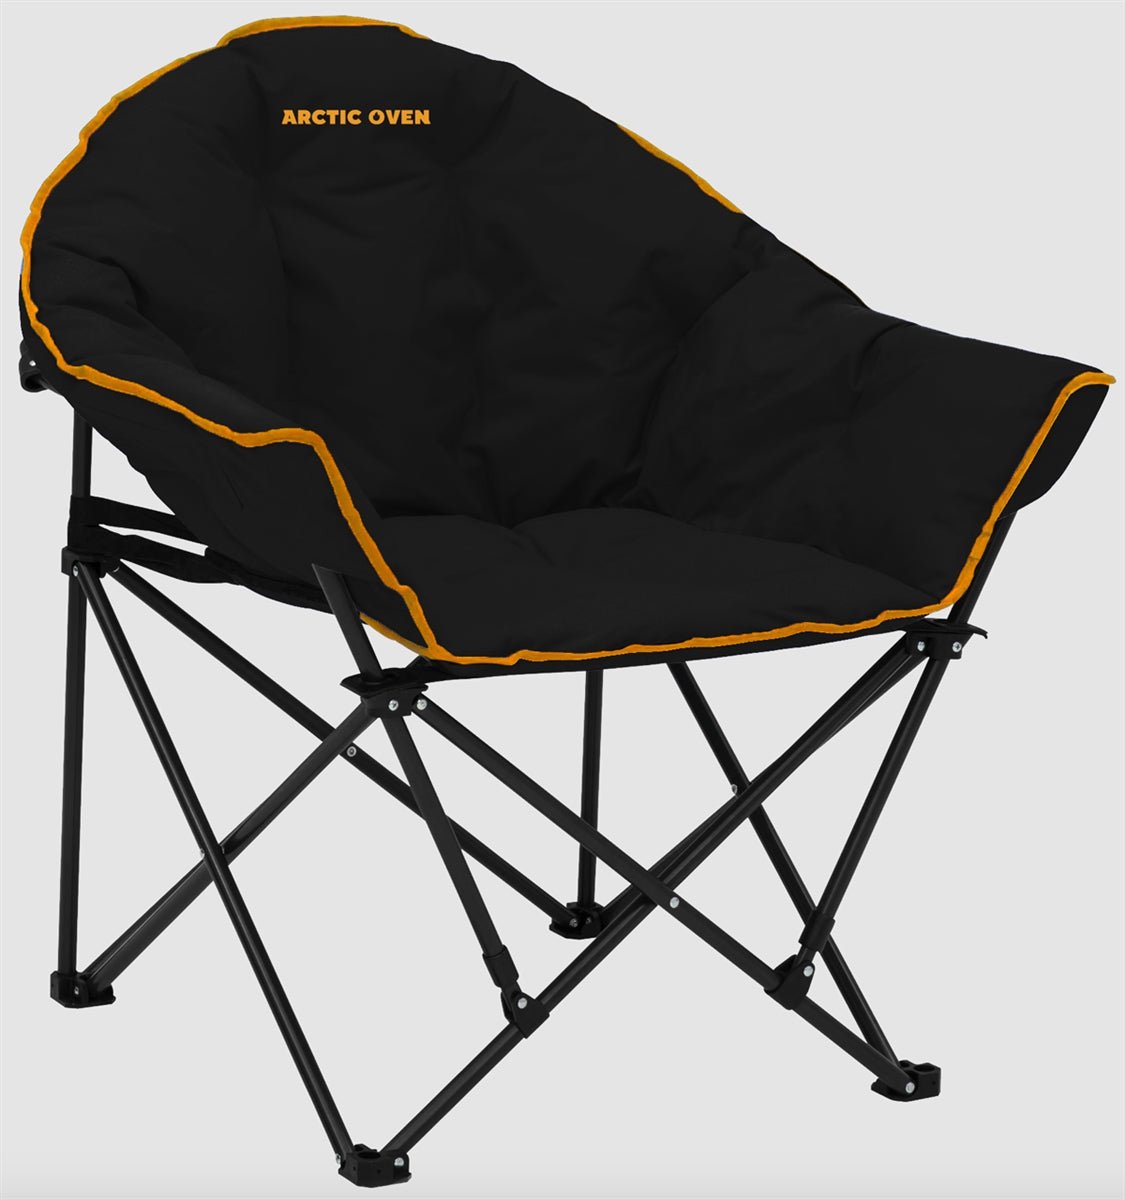 Alaska Gear Company Arctic Oven Deluxe Padded Camp Chair - AOBB-Chair-23